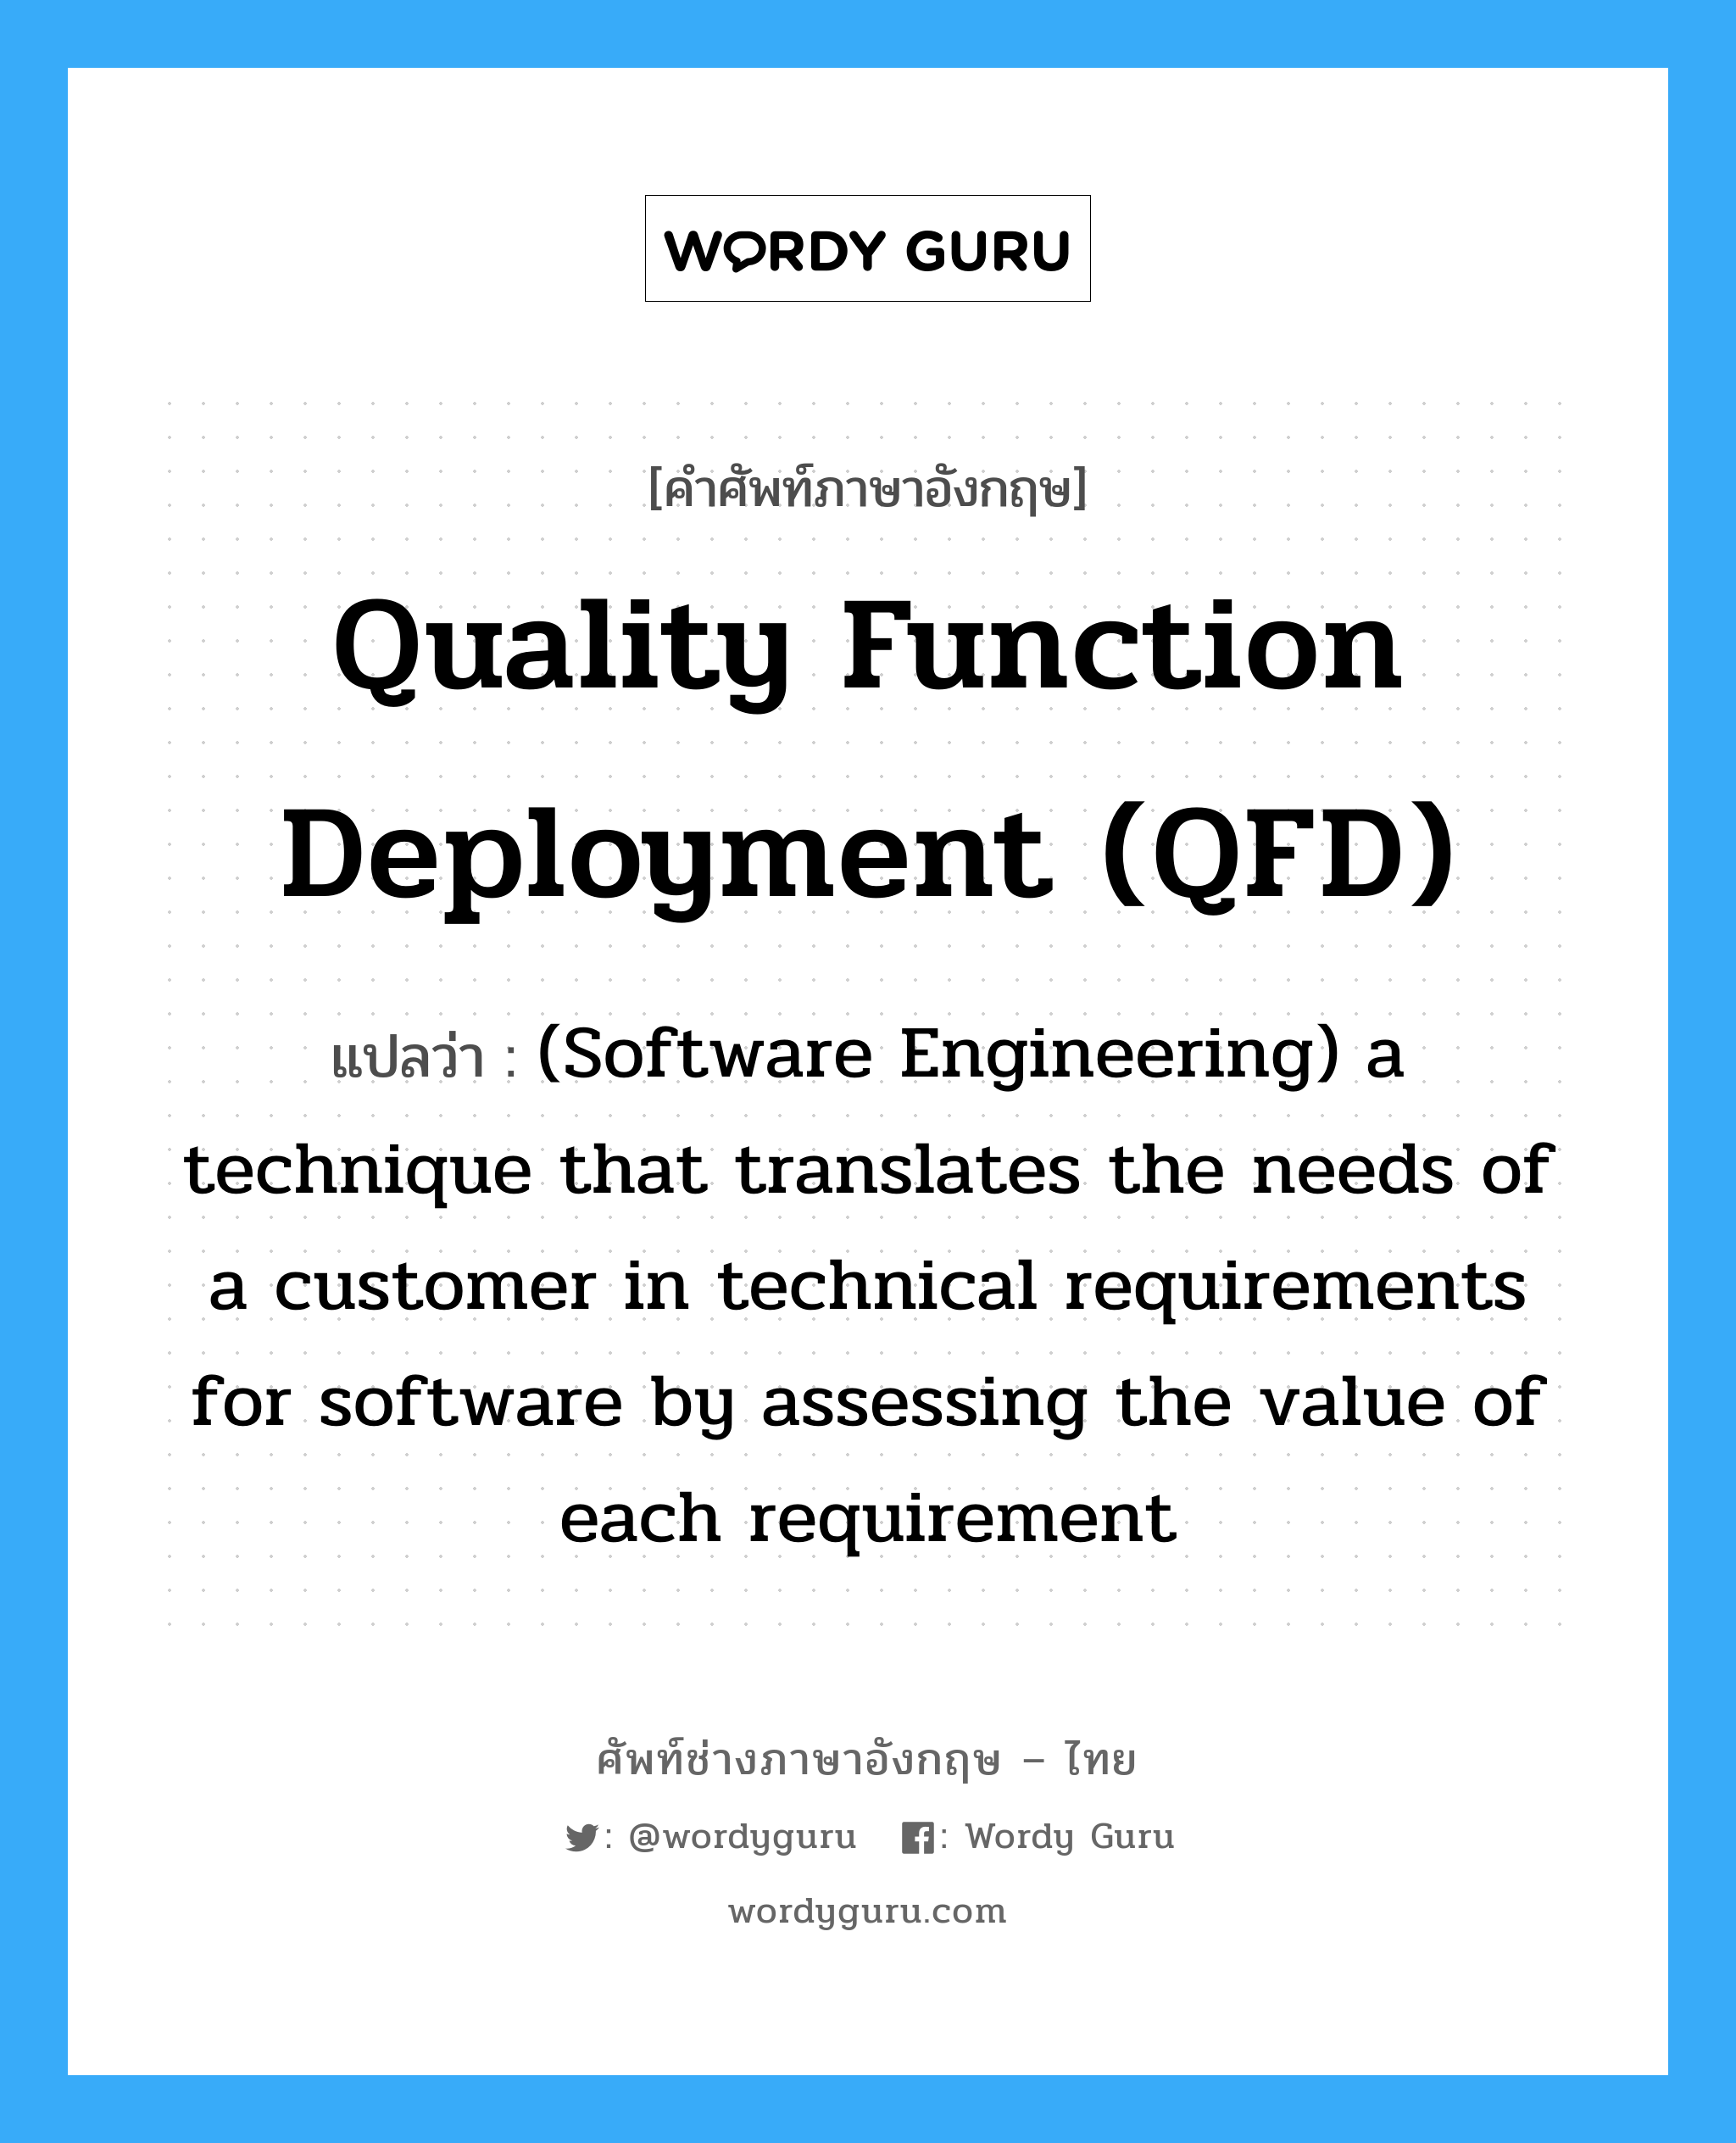 Quality function deployment (QFD) แปลว่า?, คำศัพท์ช่างภาษาอังกฤษ - ไทย Quality function deployment (QFD) คำศัพท์ภาษาอังกฤษ Quality function deployment (QFD) แปลว่า (Software Engineering) a technique that translates the needs of a customer in technical requirements for software by assessing the value of each requirement